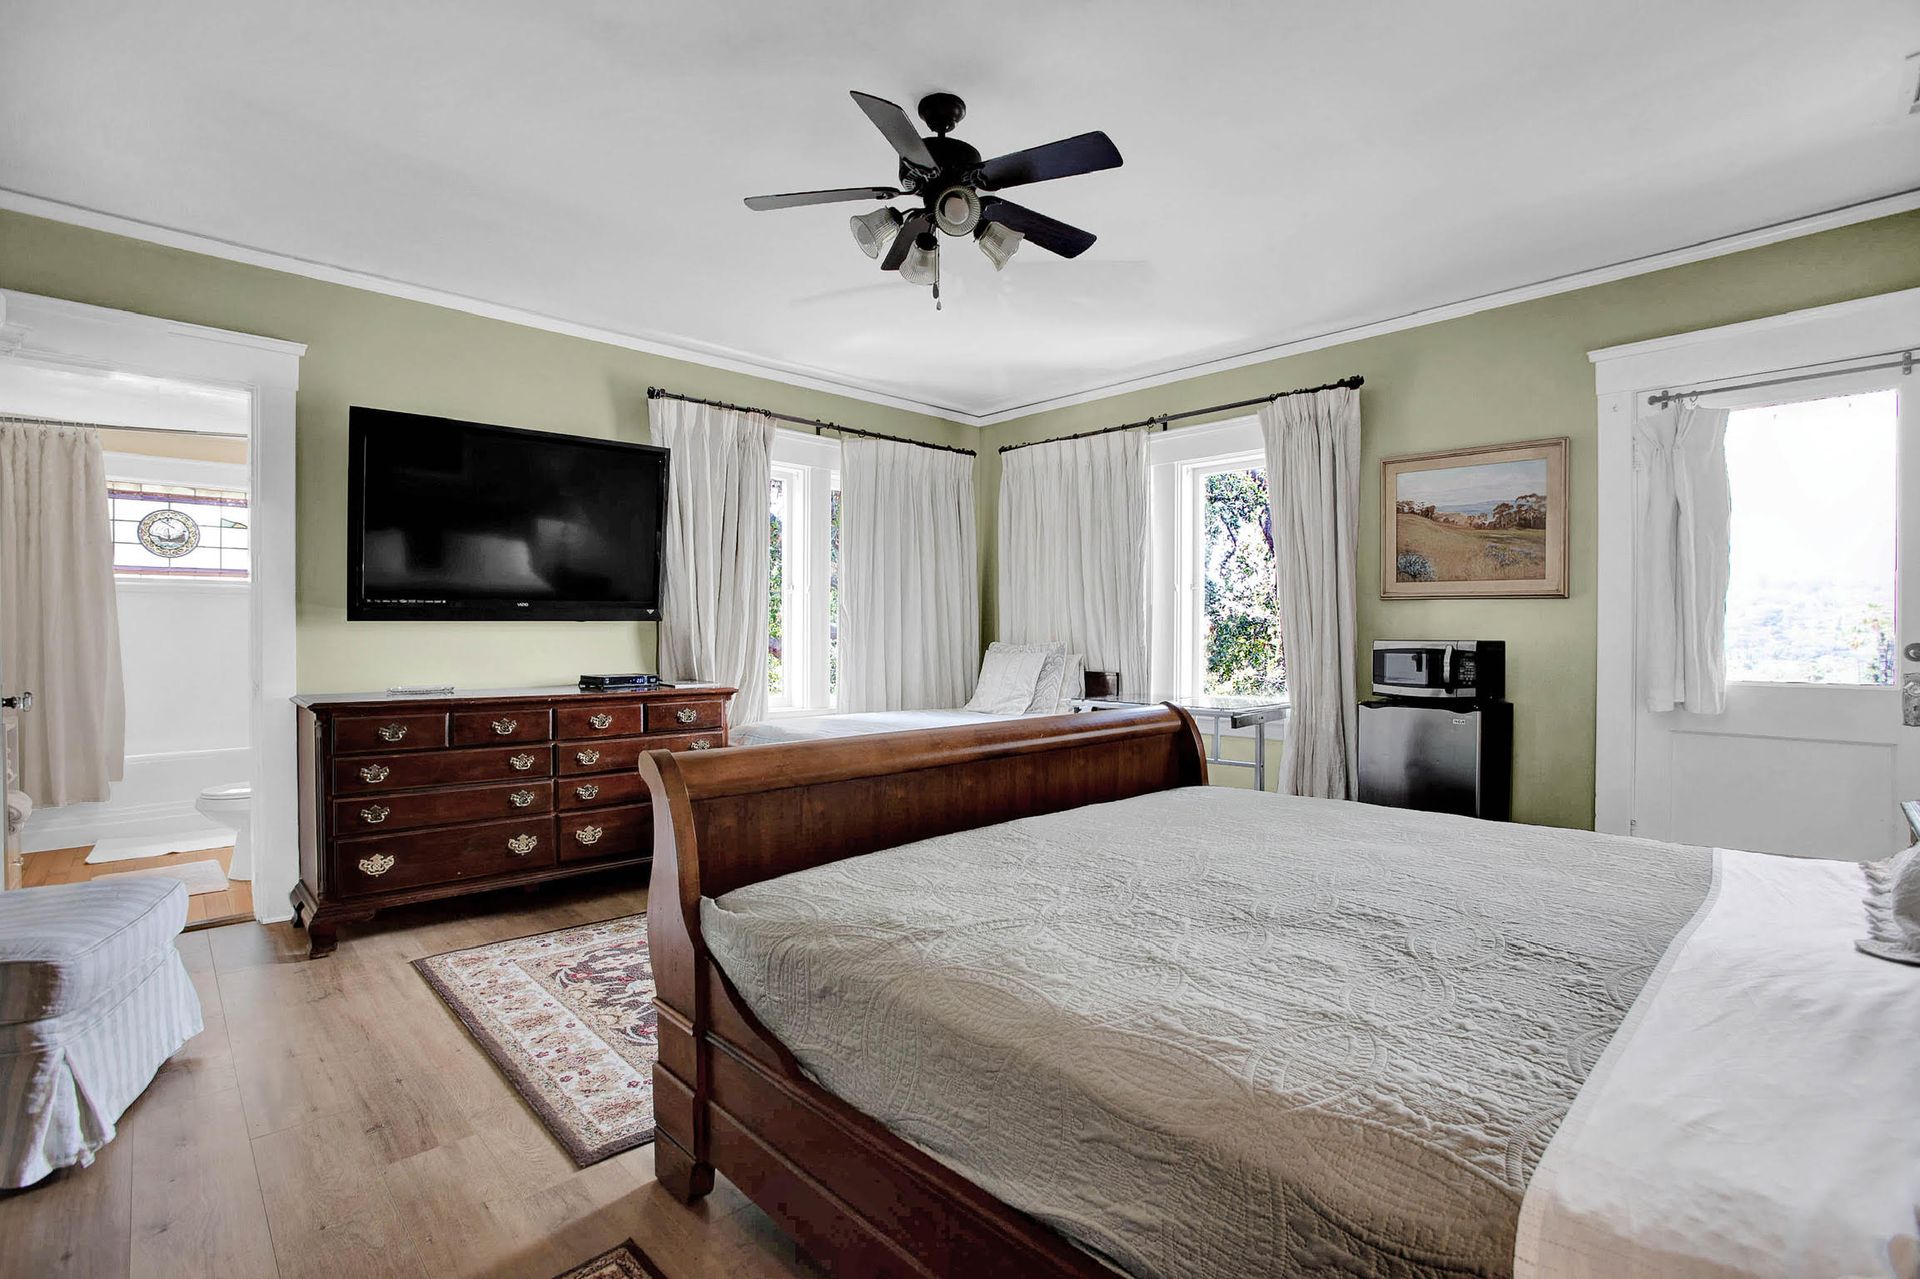 A bedroom with a king size bed , dresser , television and ceiling fan.